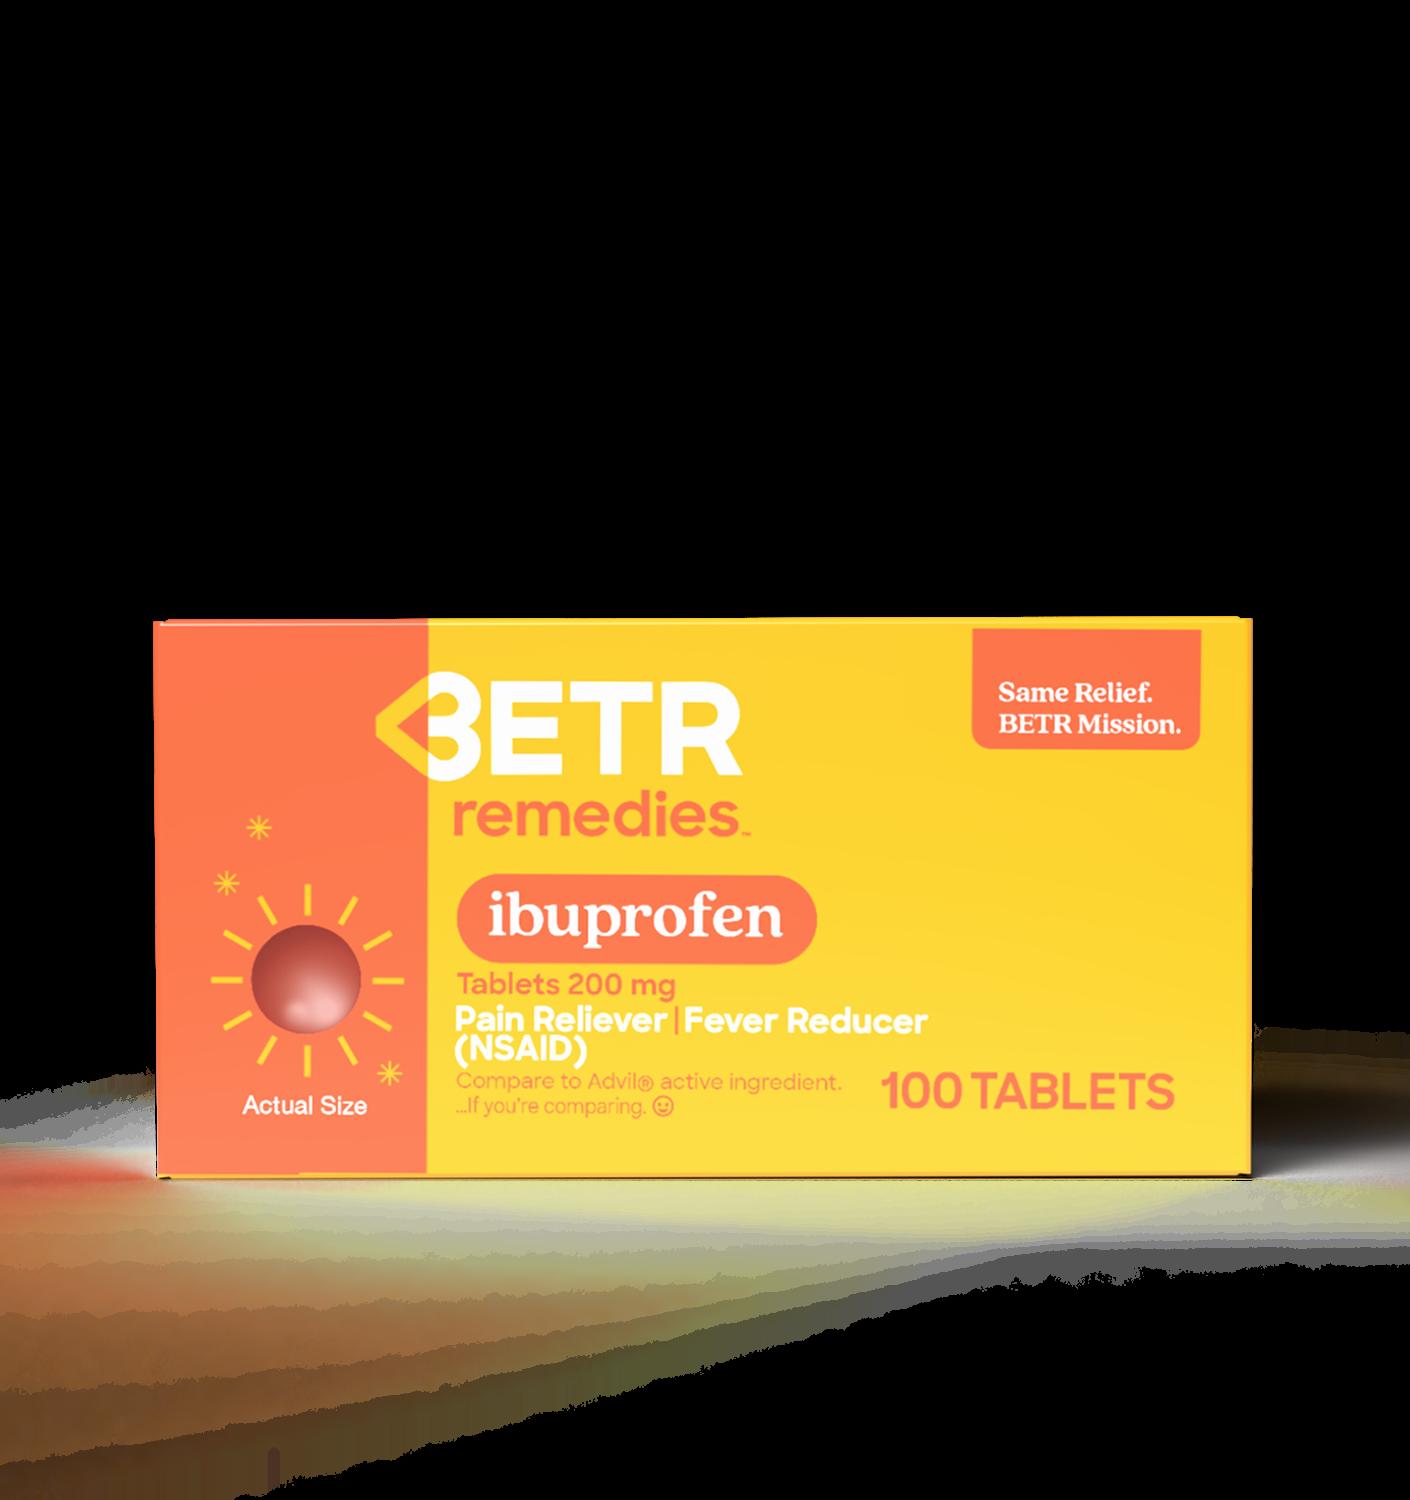 A box of Betr Remedies Ibuprofen tablets, a pain reliever and fever reducer.